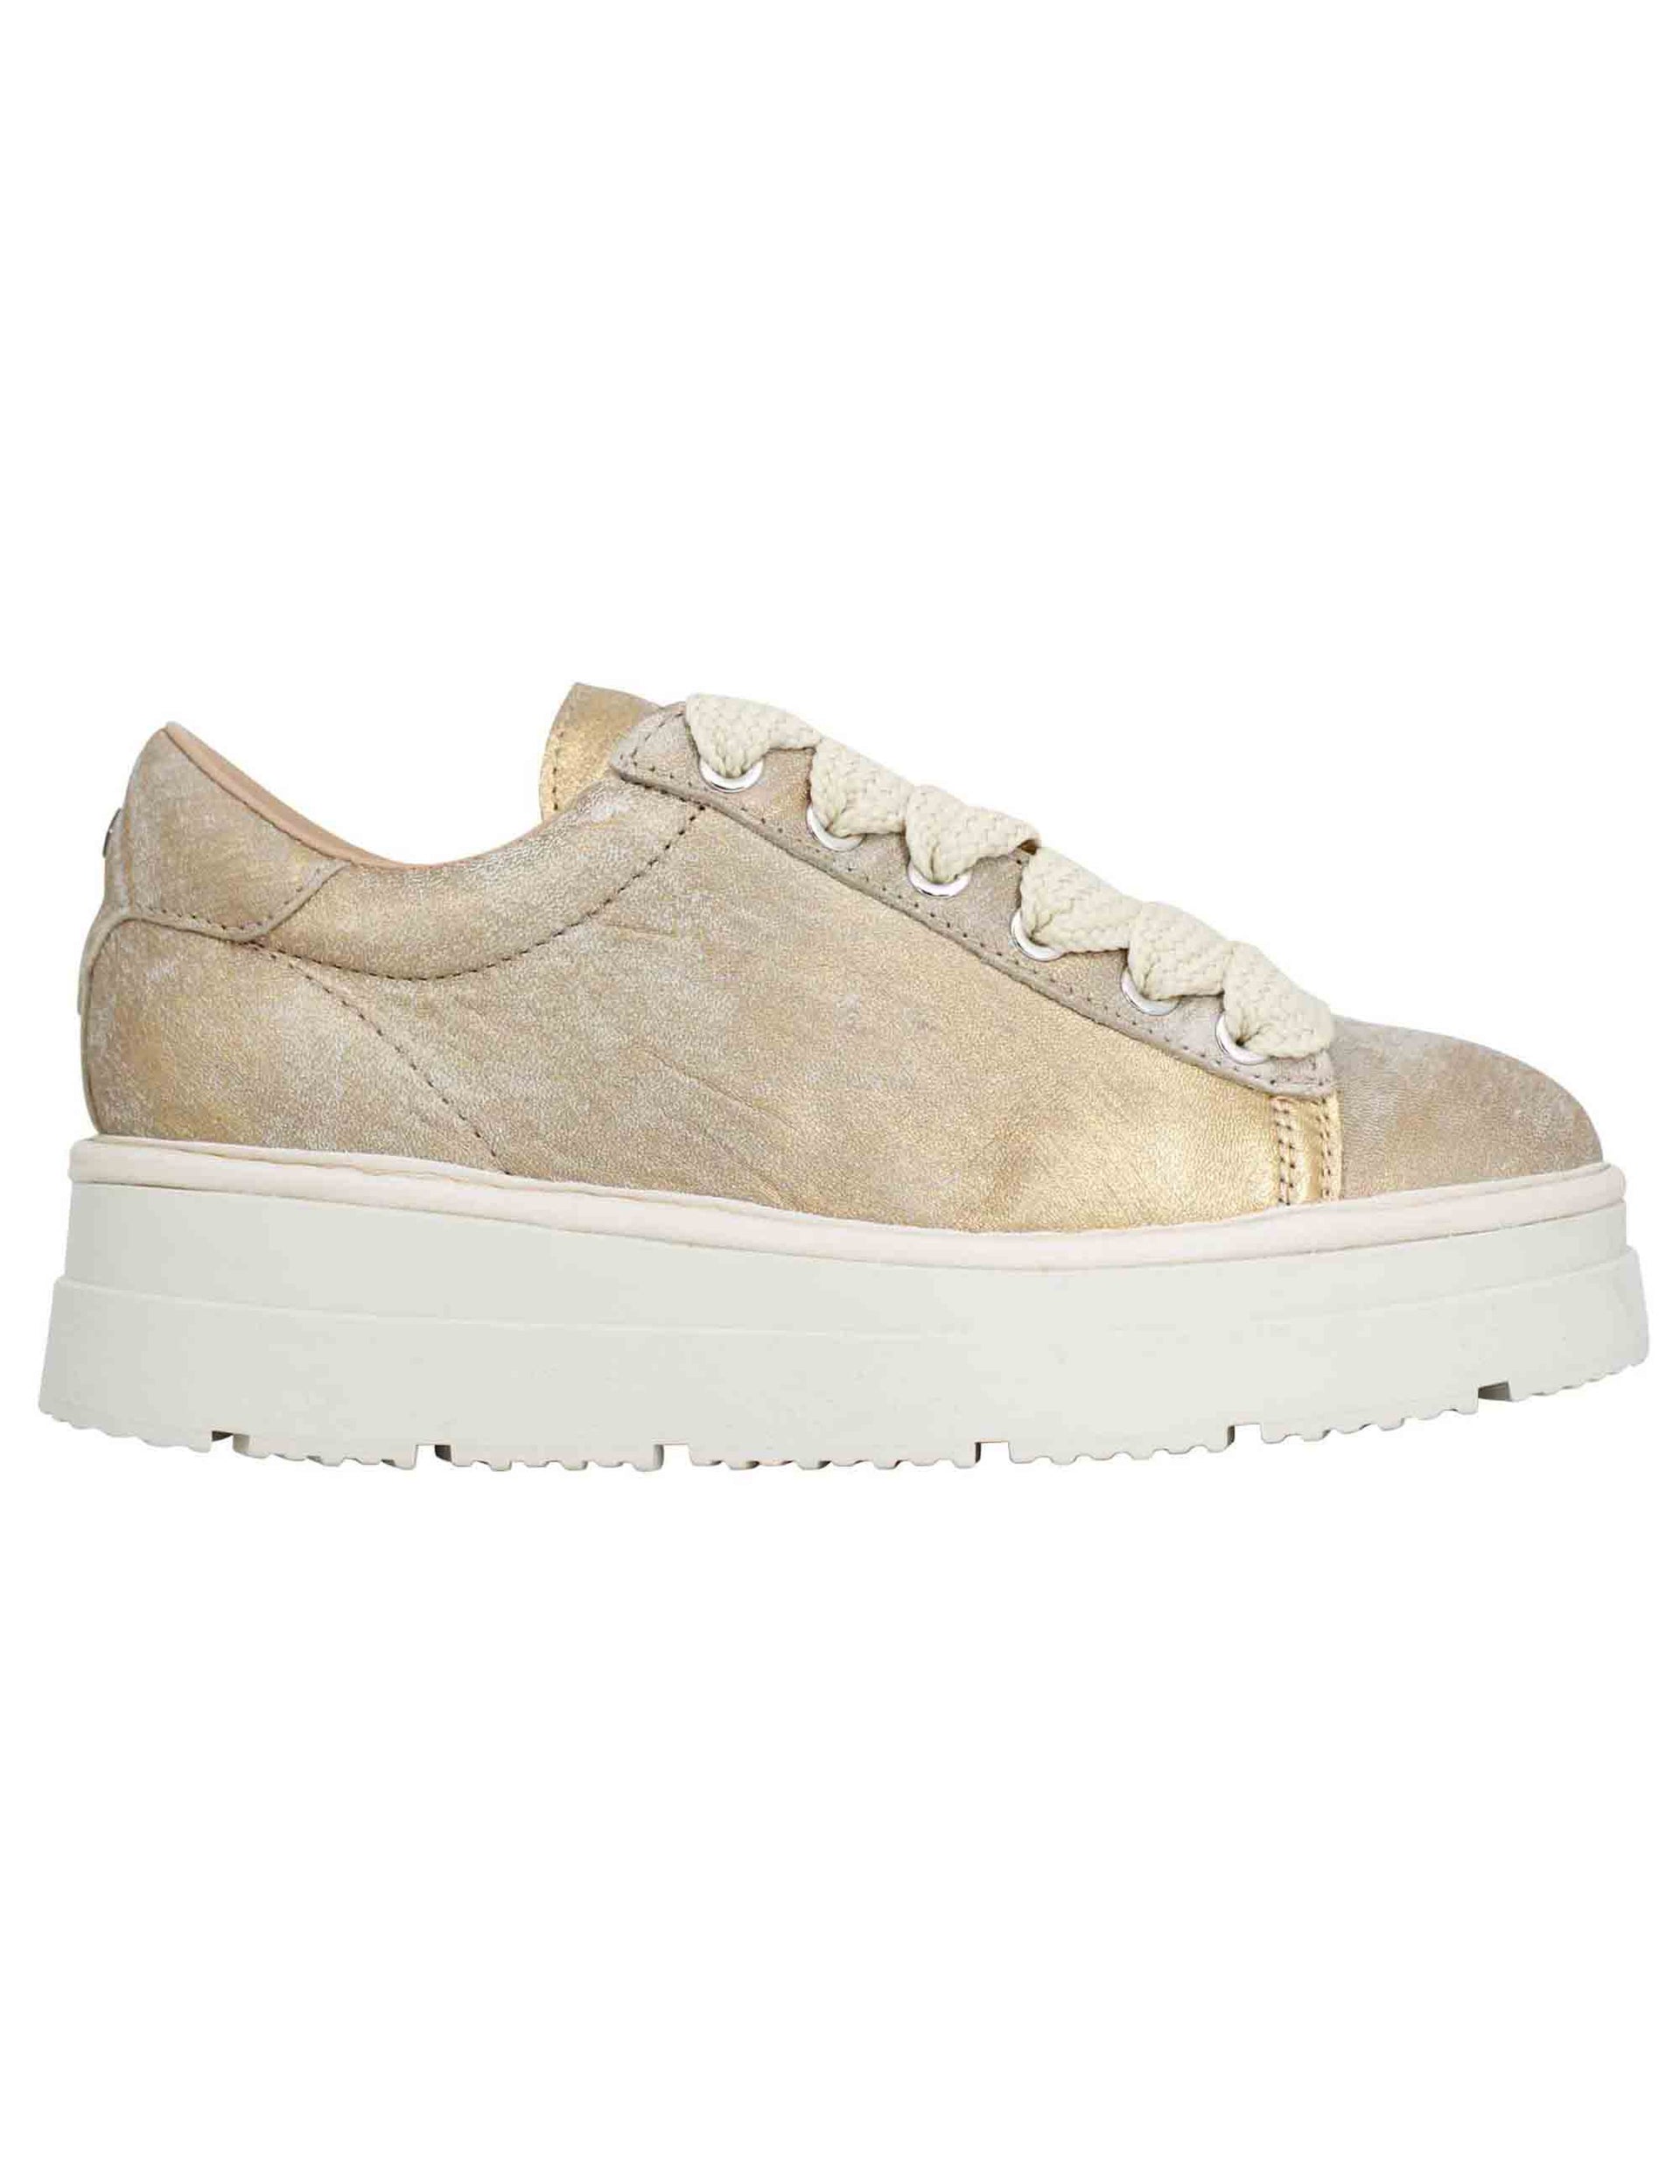 Women's sneakers in gold laminated leather with high bottom